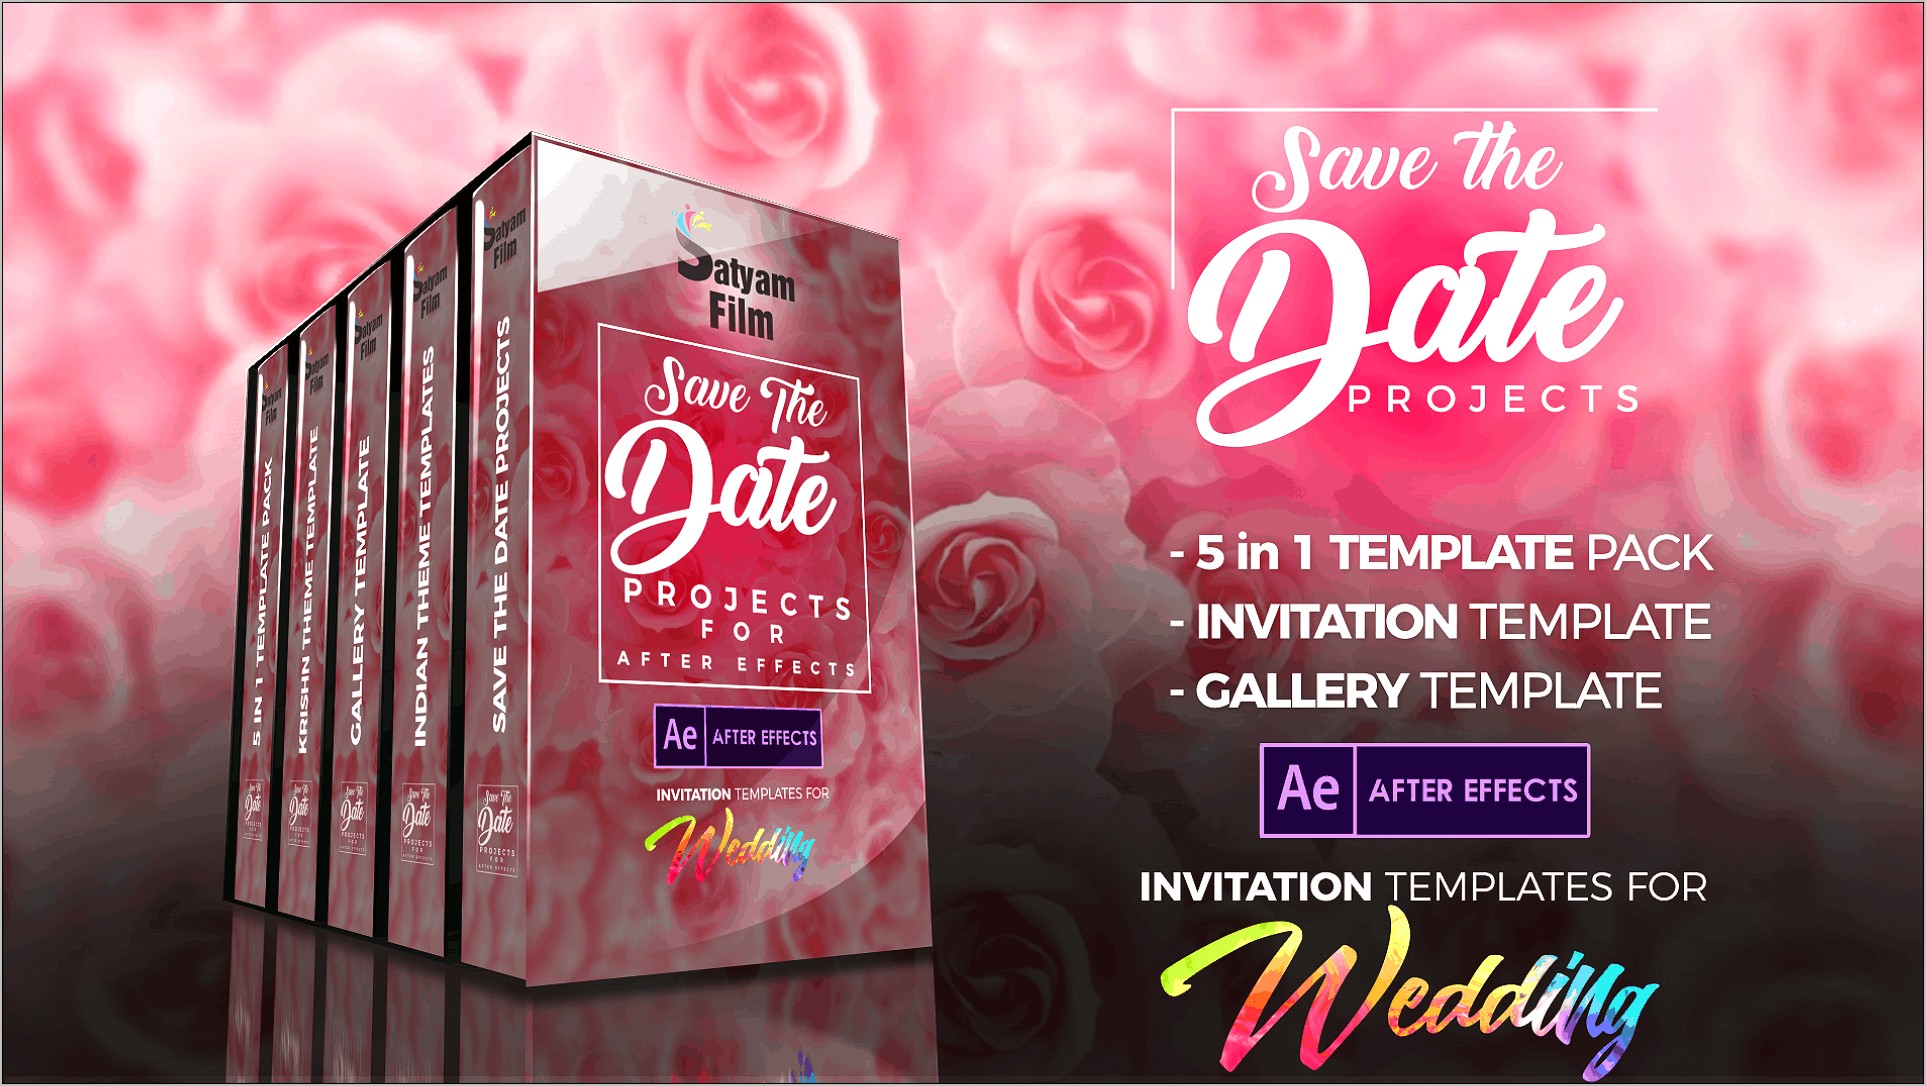 After Effects Invitation Templates Free Download